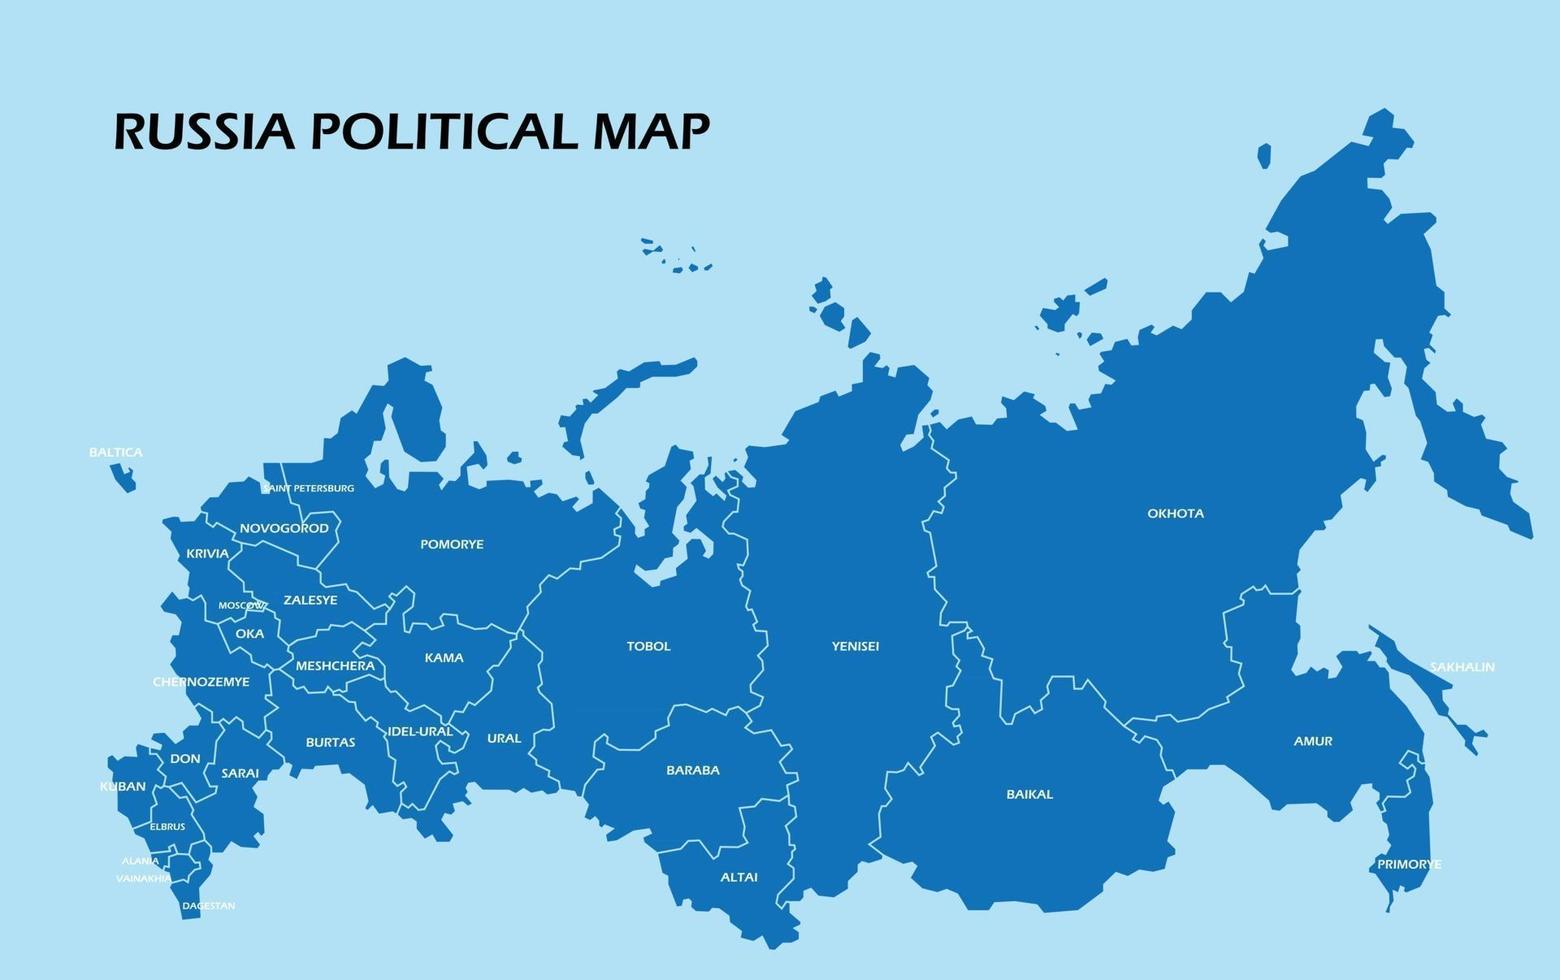 Russia political map divide by state colorful outline simplicity style. vector